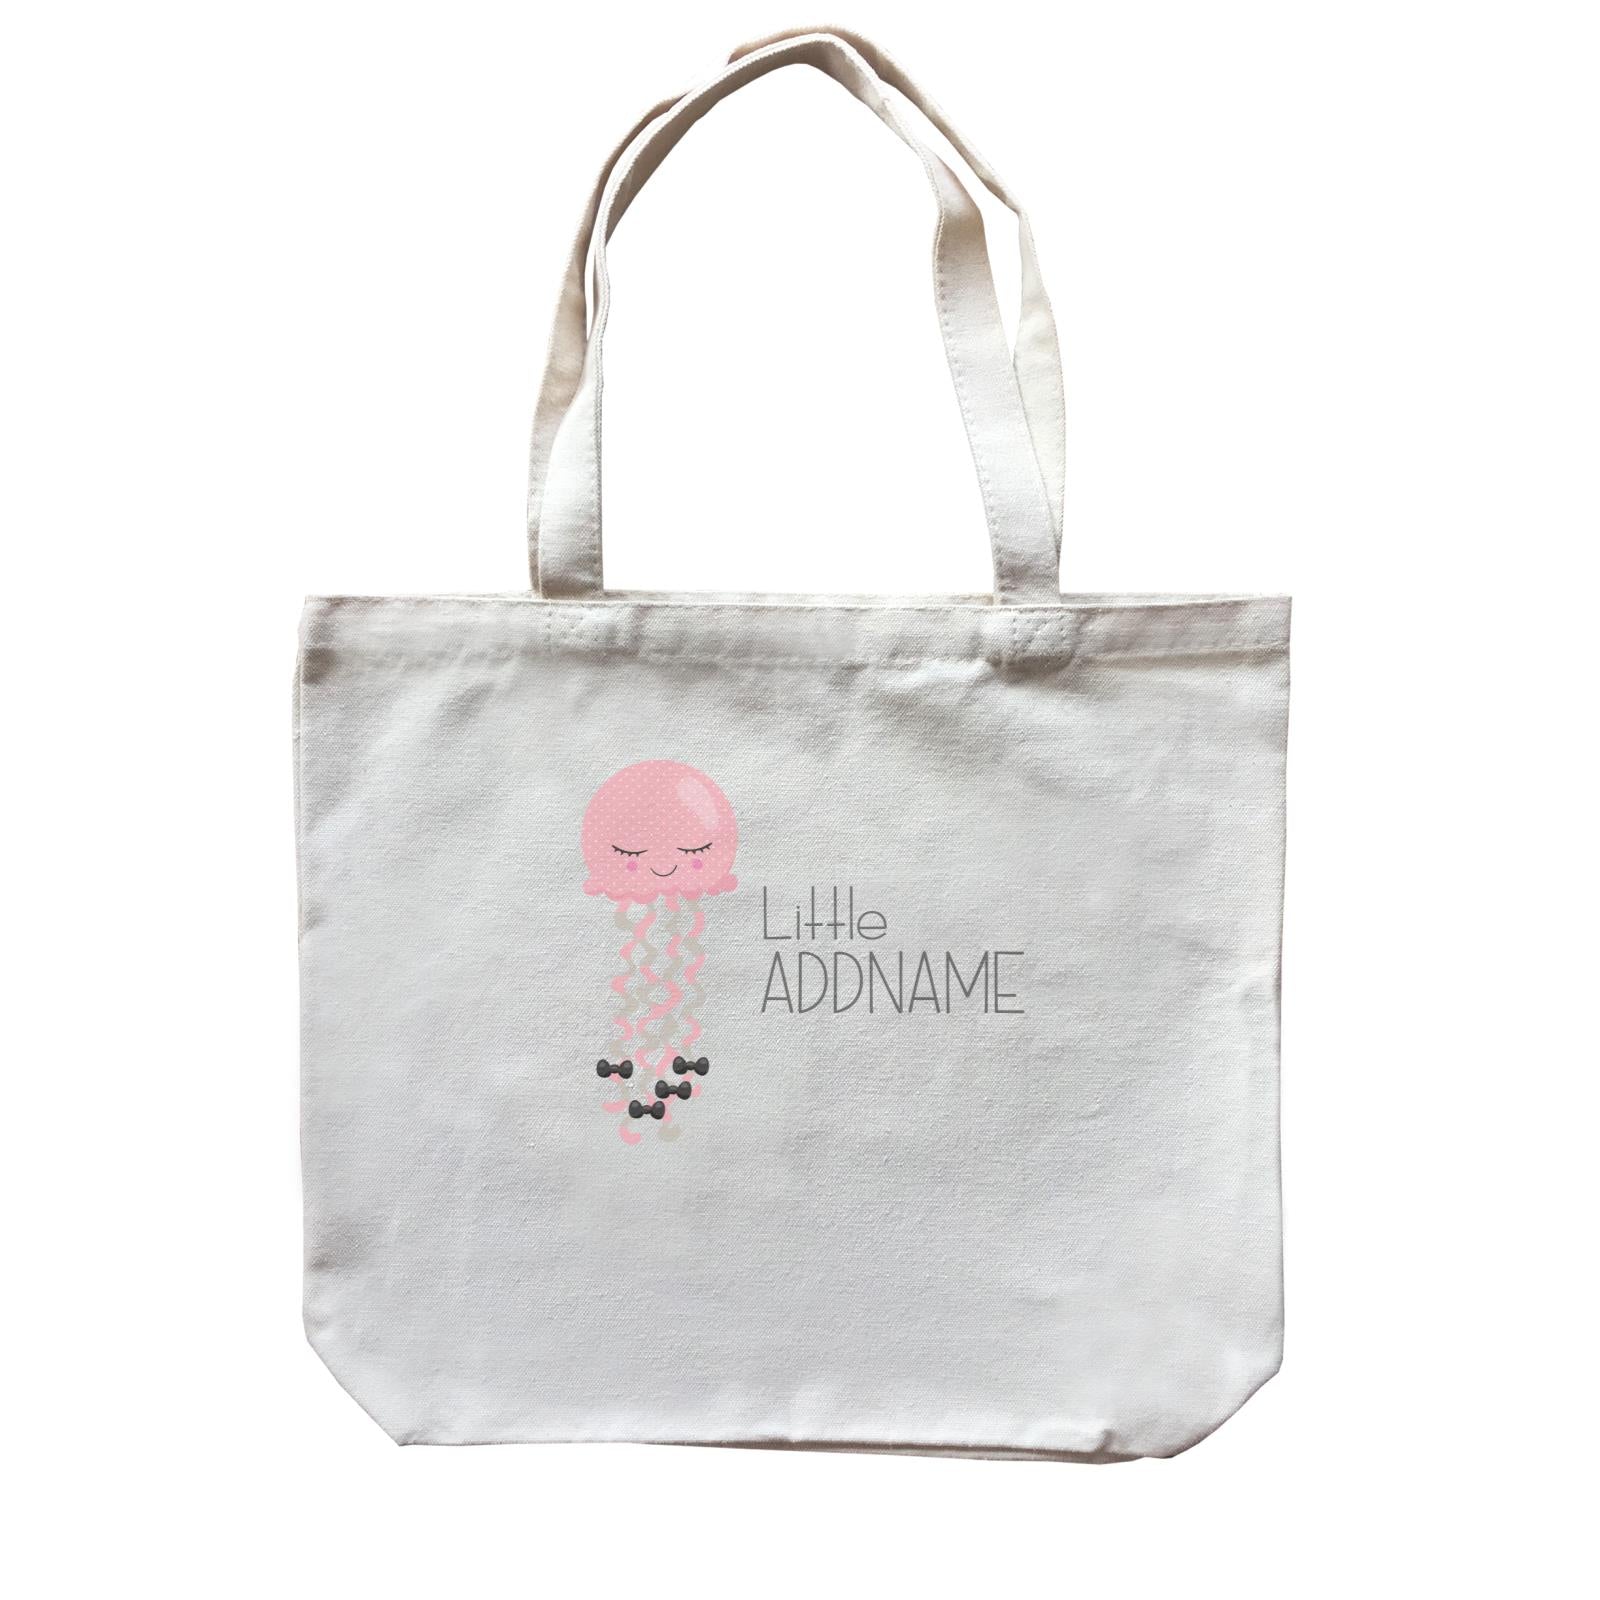 Nursery Animals LIttle Pink Jellyfish with Ribbons Addname Canvas Bag